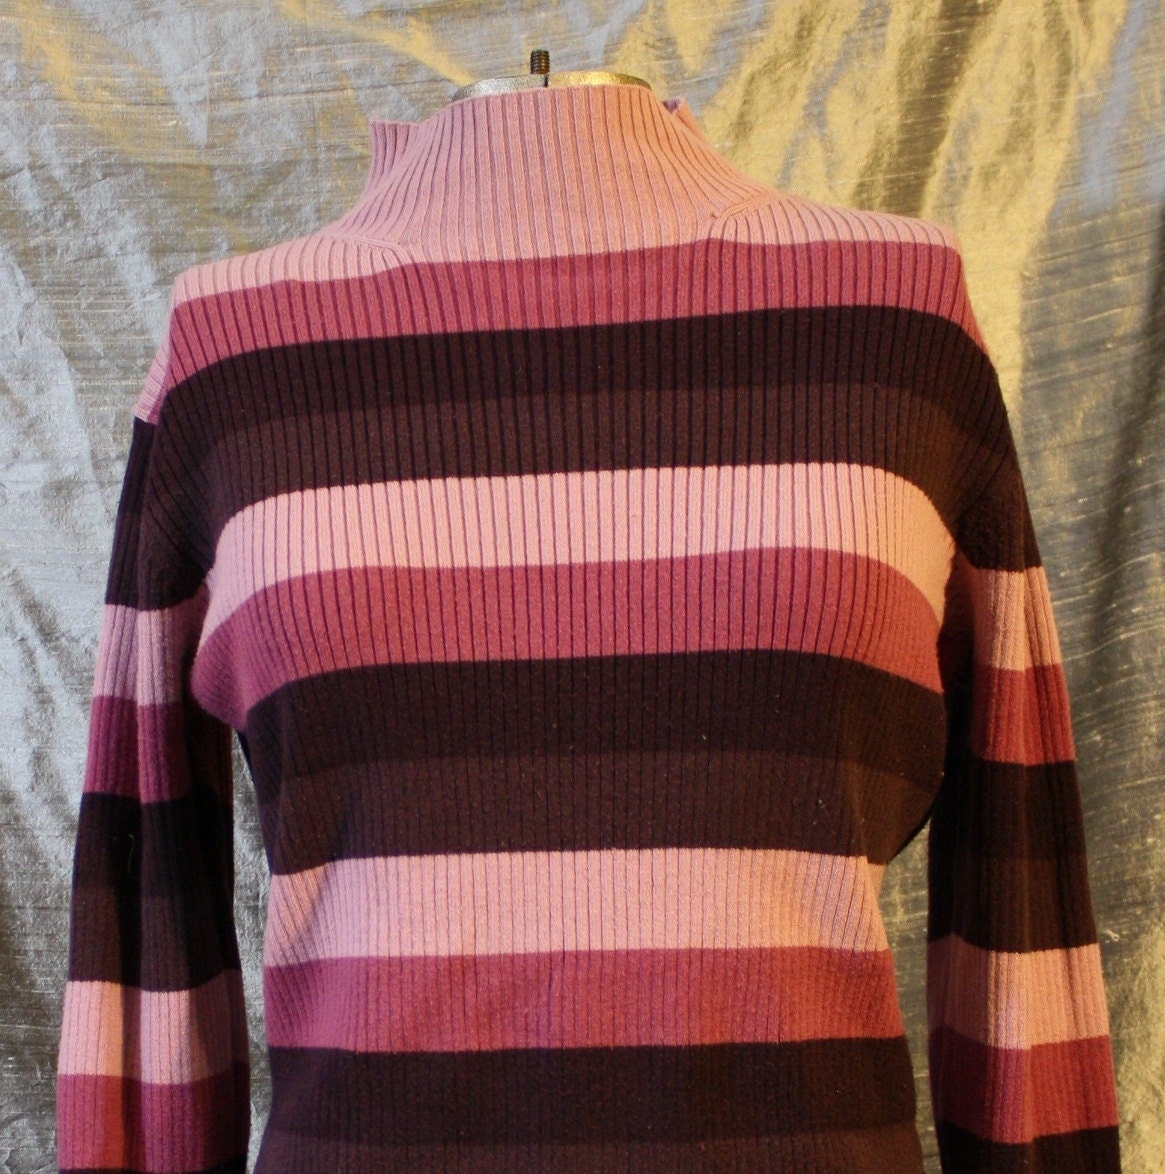 Purple and Pink Striped Sweater by eveningangel on Etsy